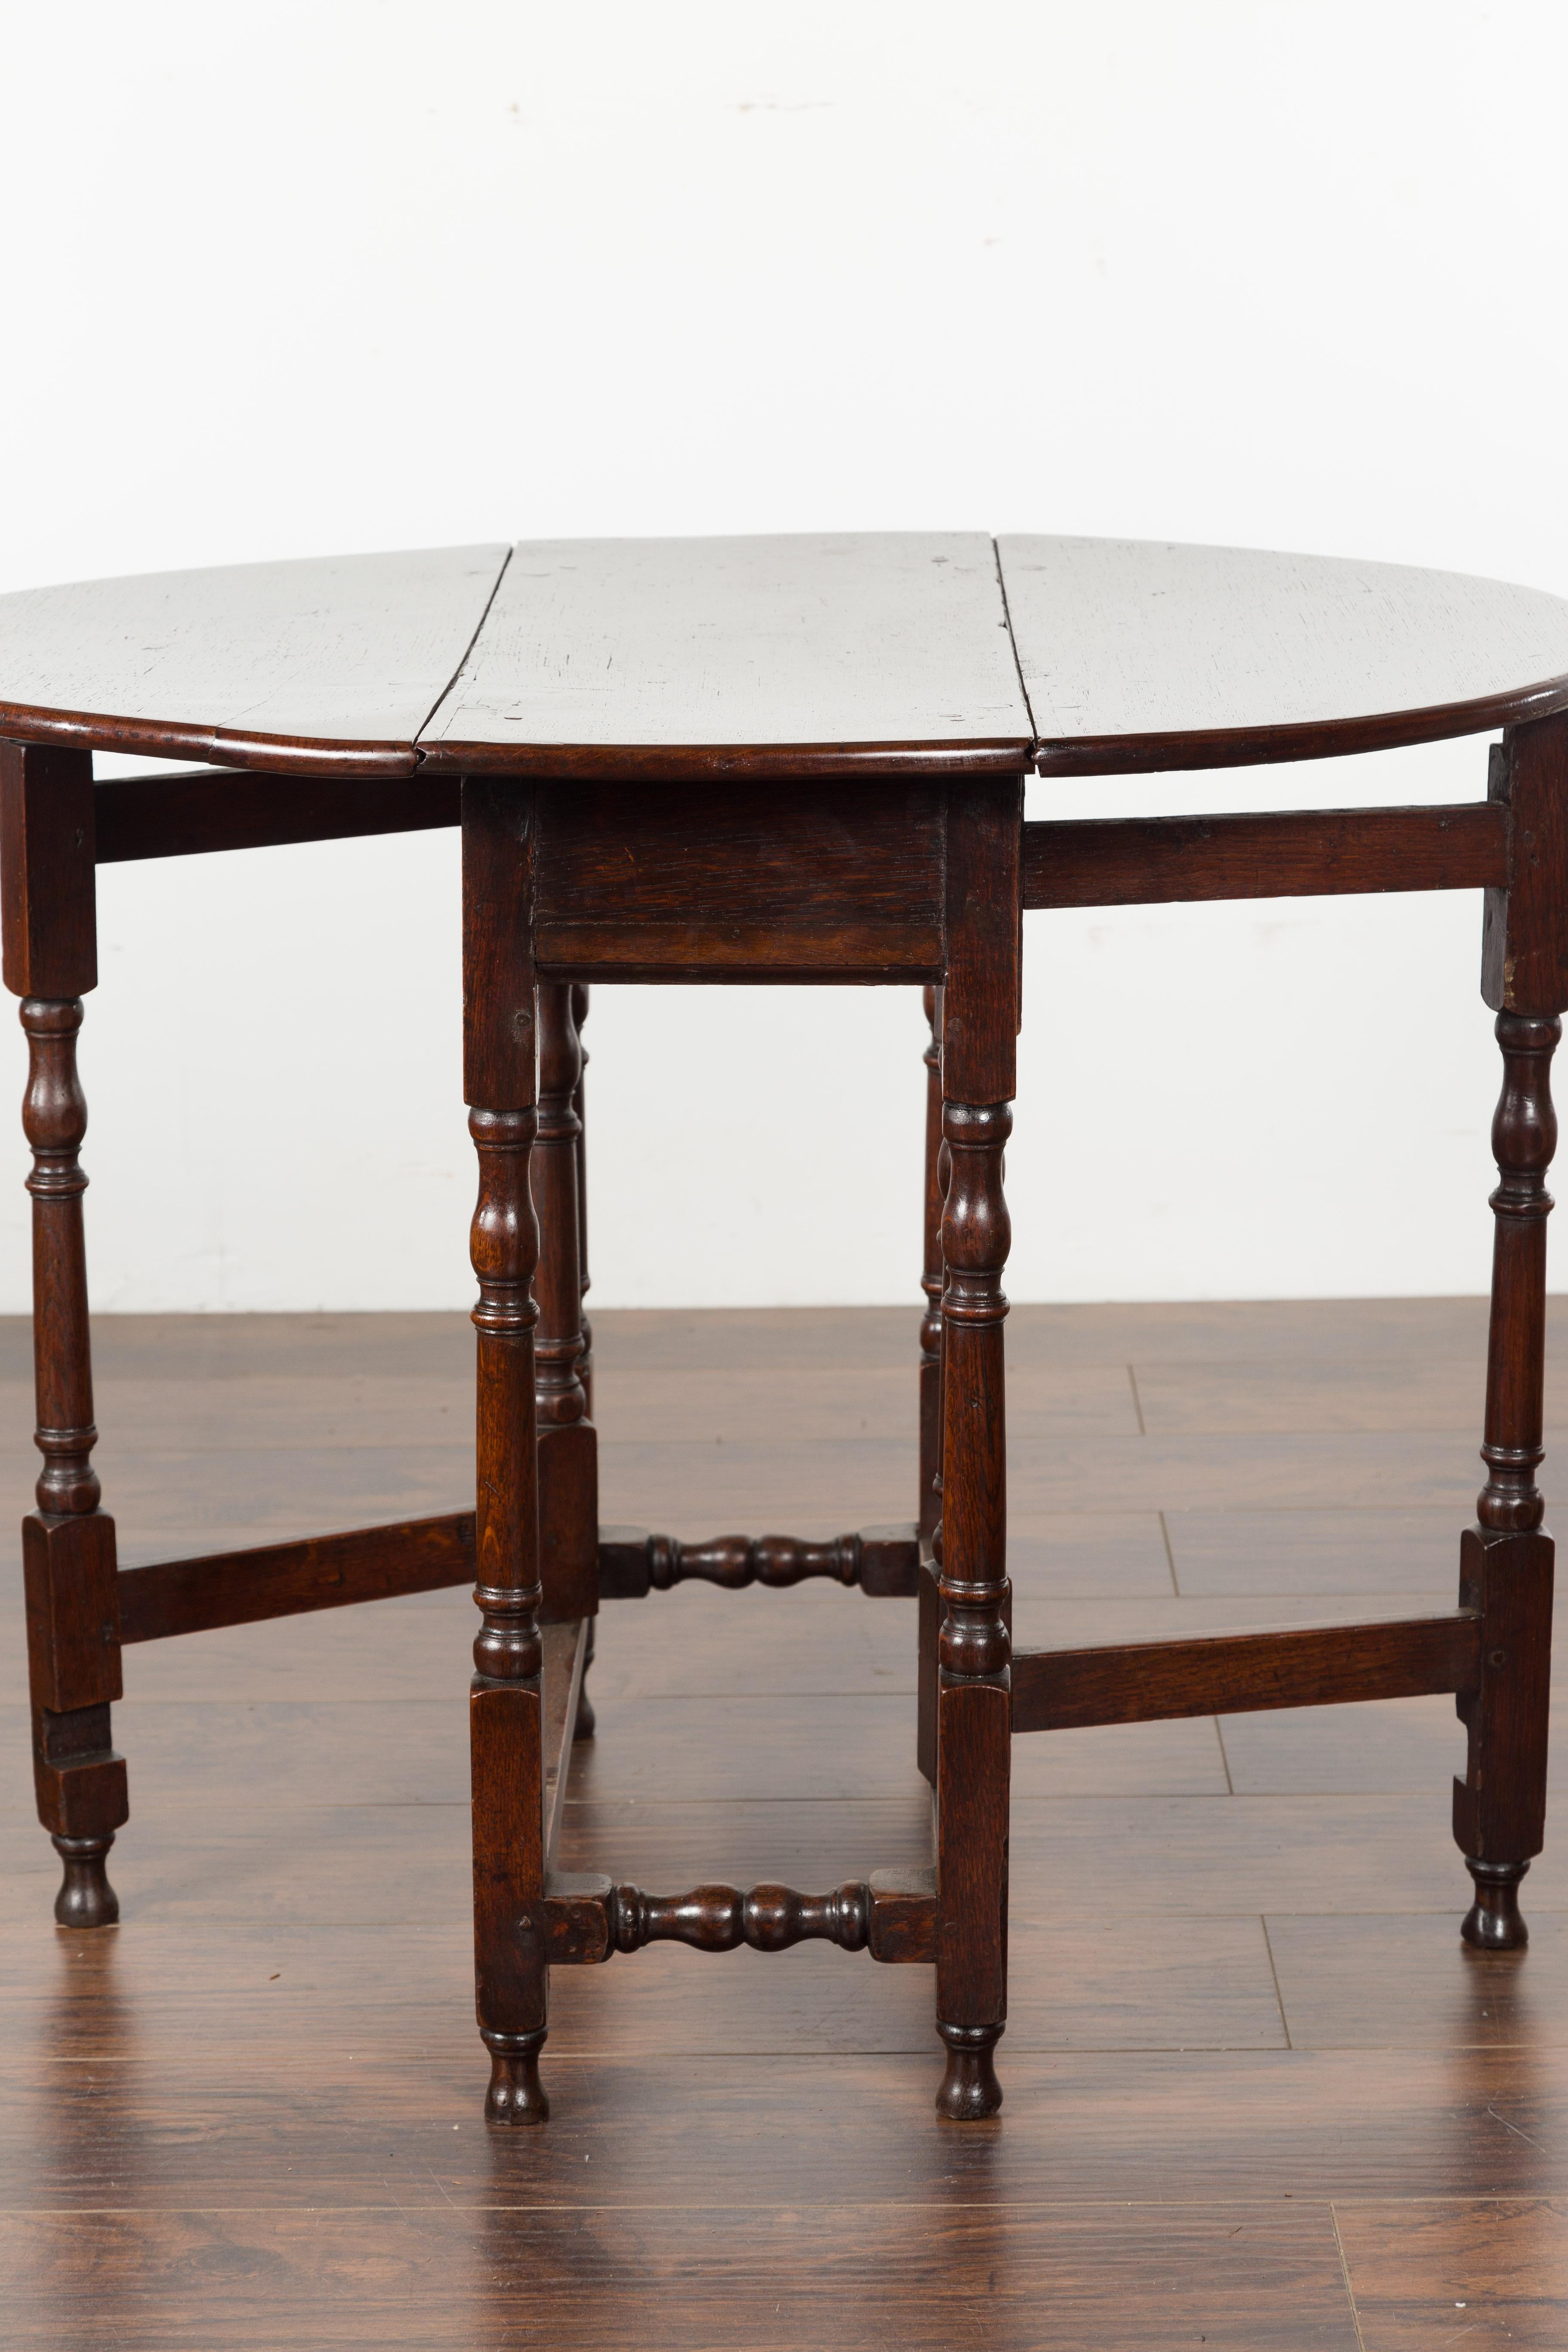 Petite English Oval Oak 19th Century Drop-Leaf Table with Baluster Legs For Sale 8